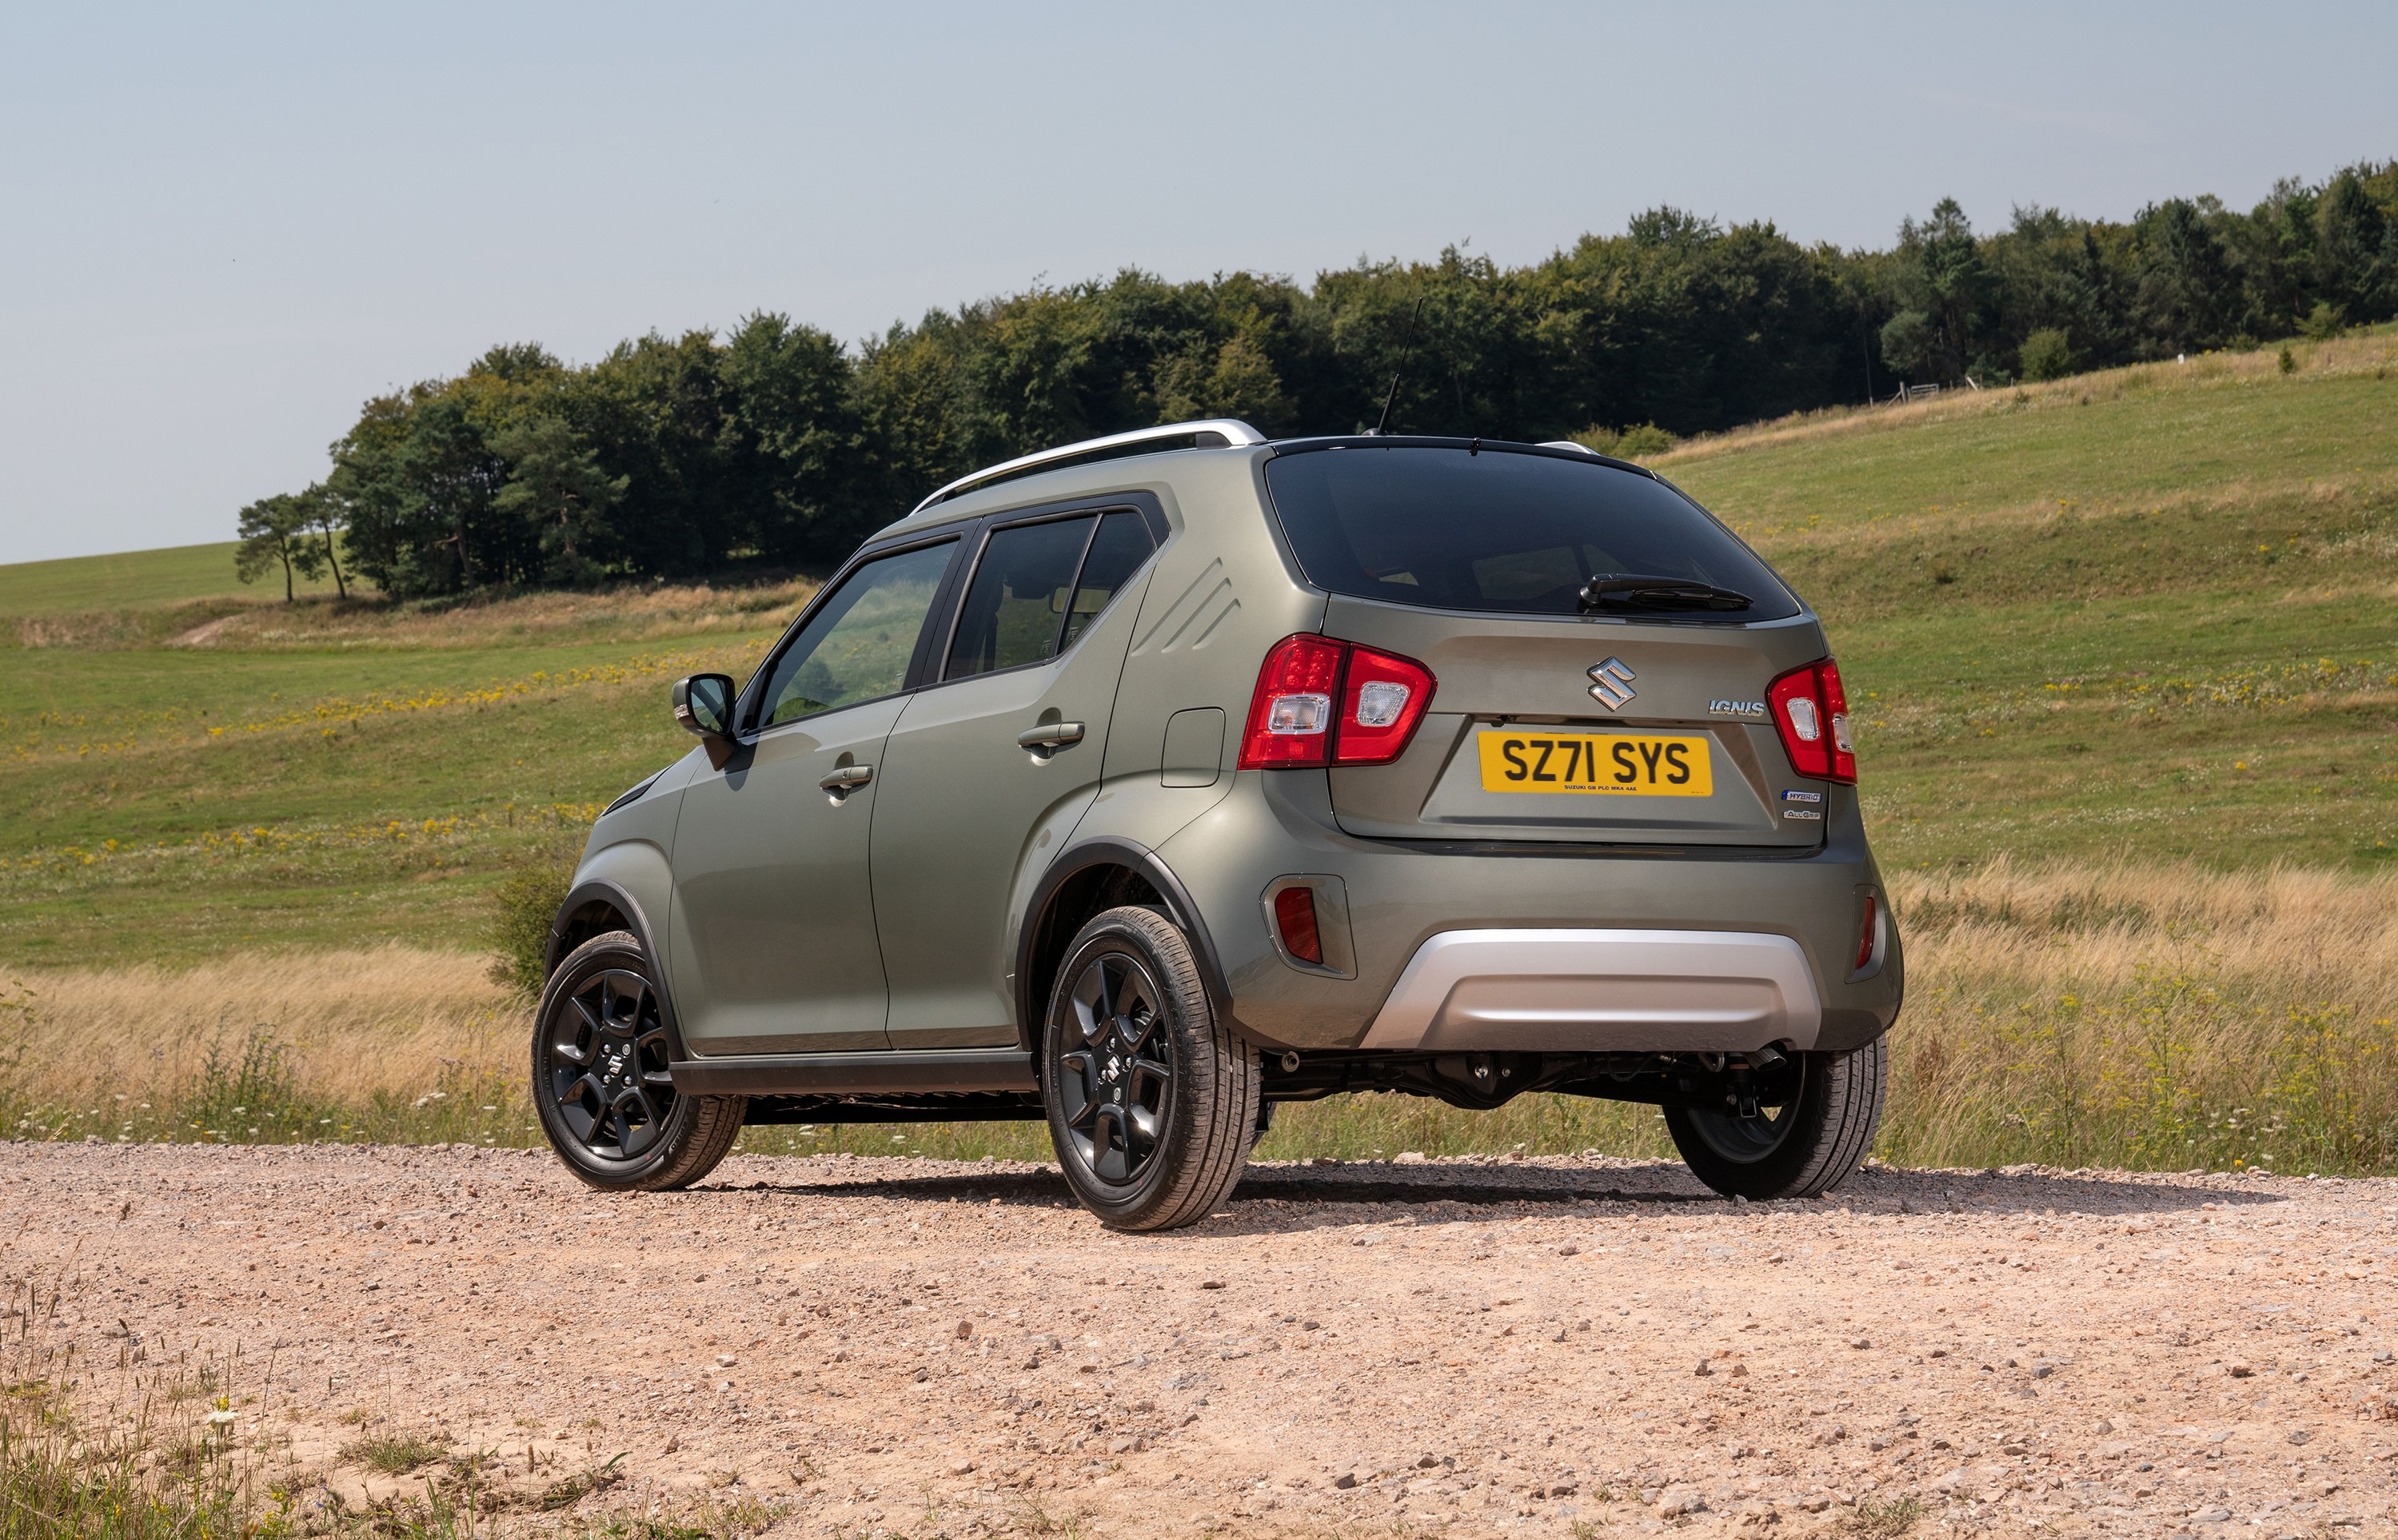 Category wins for Suzuki Ignis at the 2022 What Car? Awards